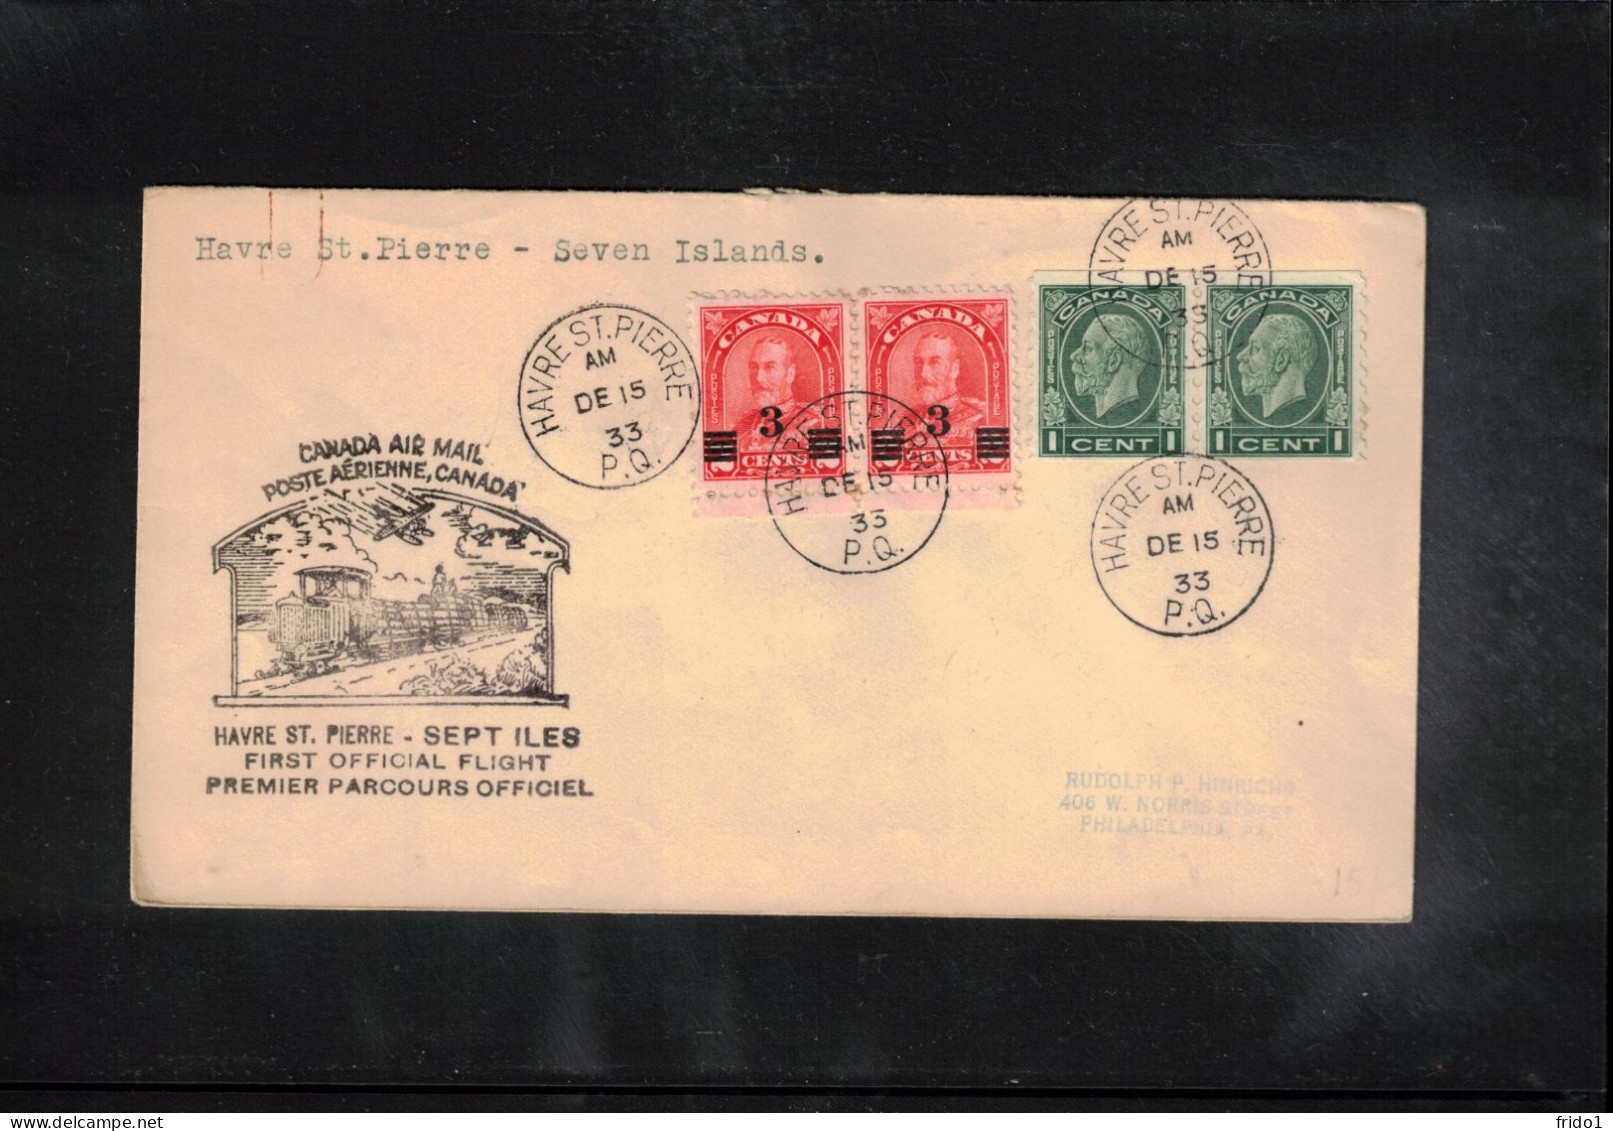 Canada 1933 Canada Air Mail - First Official Flight Havre St.Pierre - Seven Islands - Primeros Vuelos